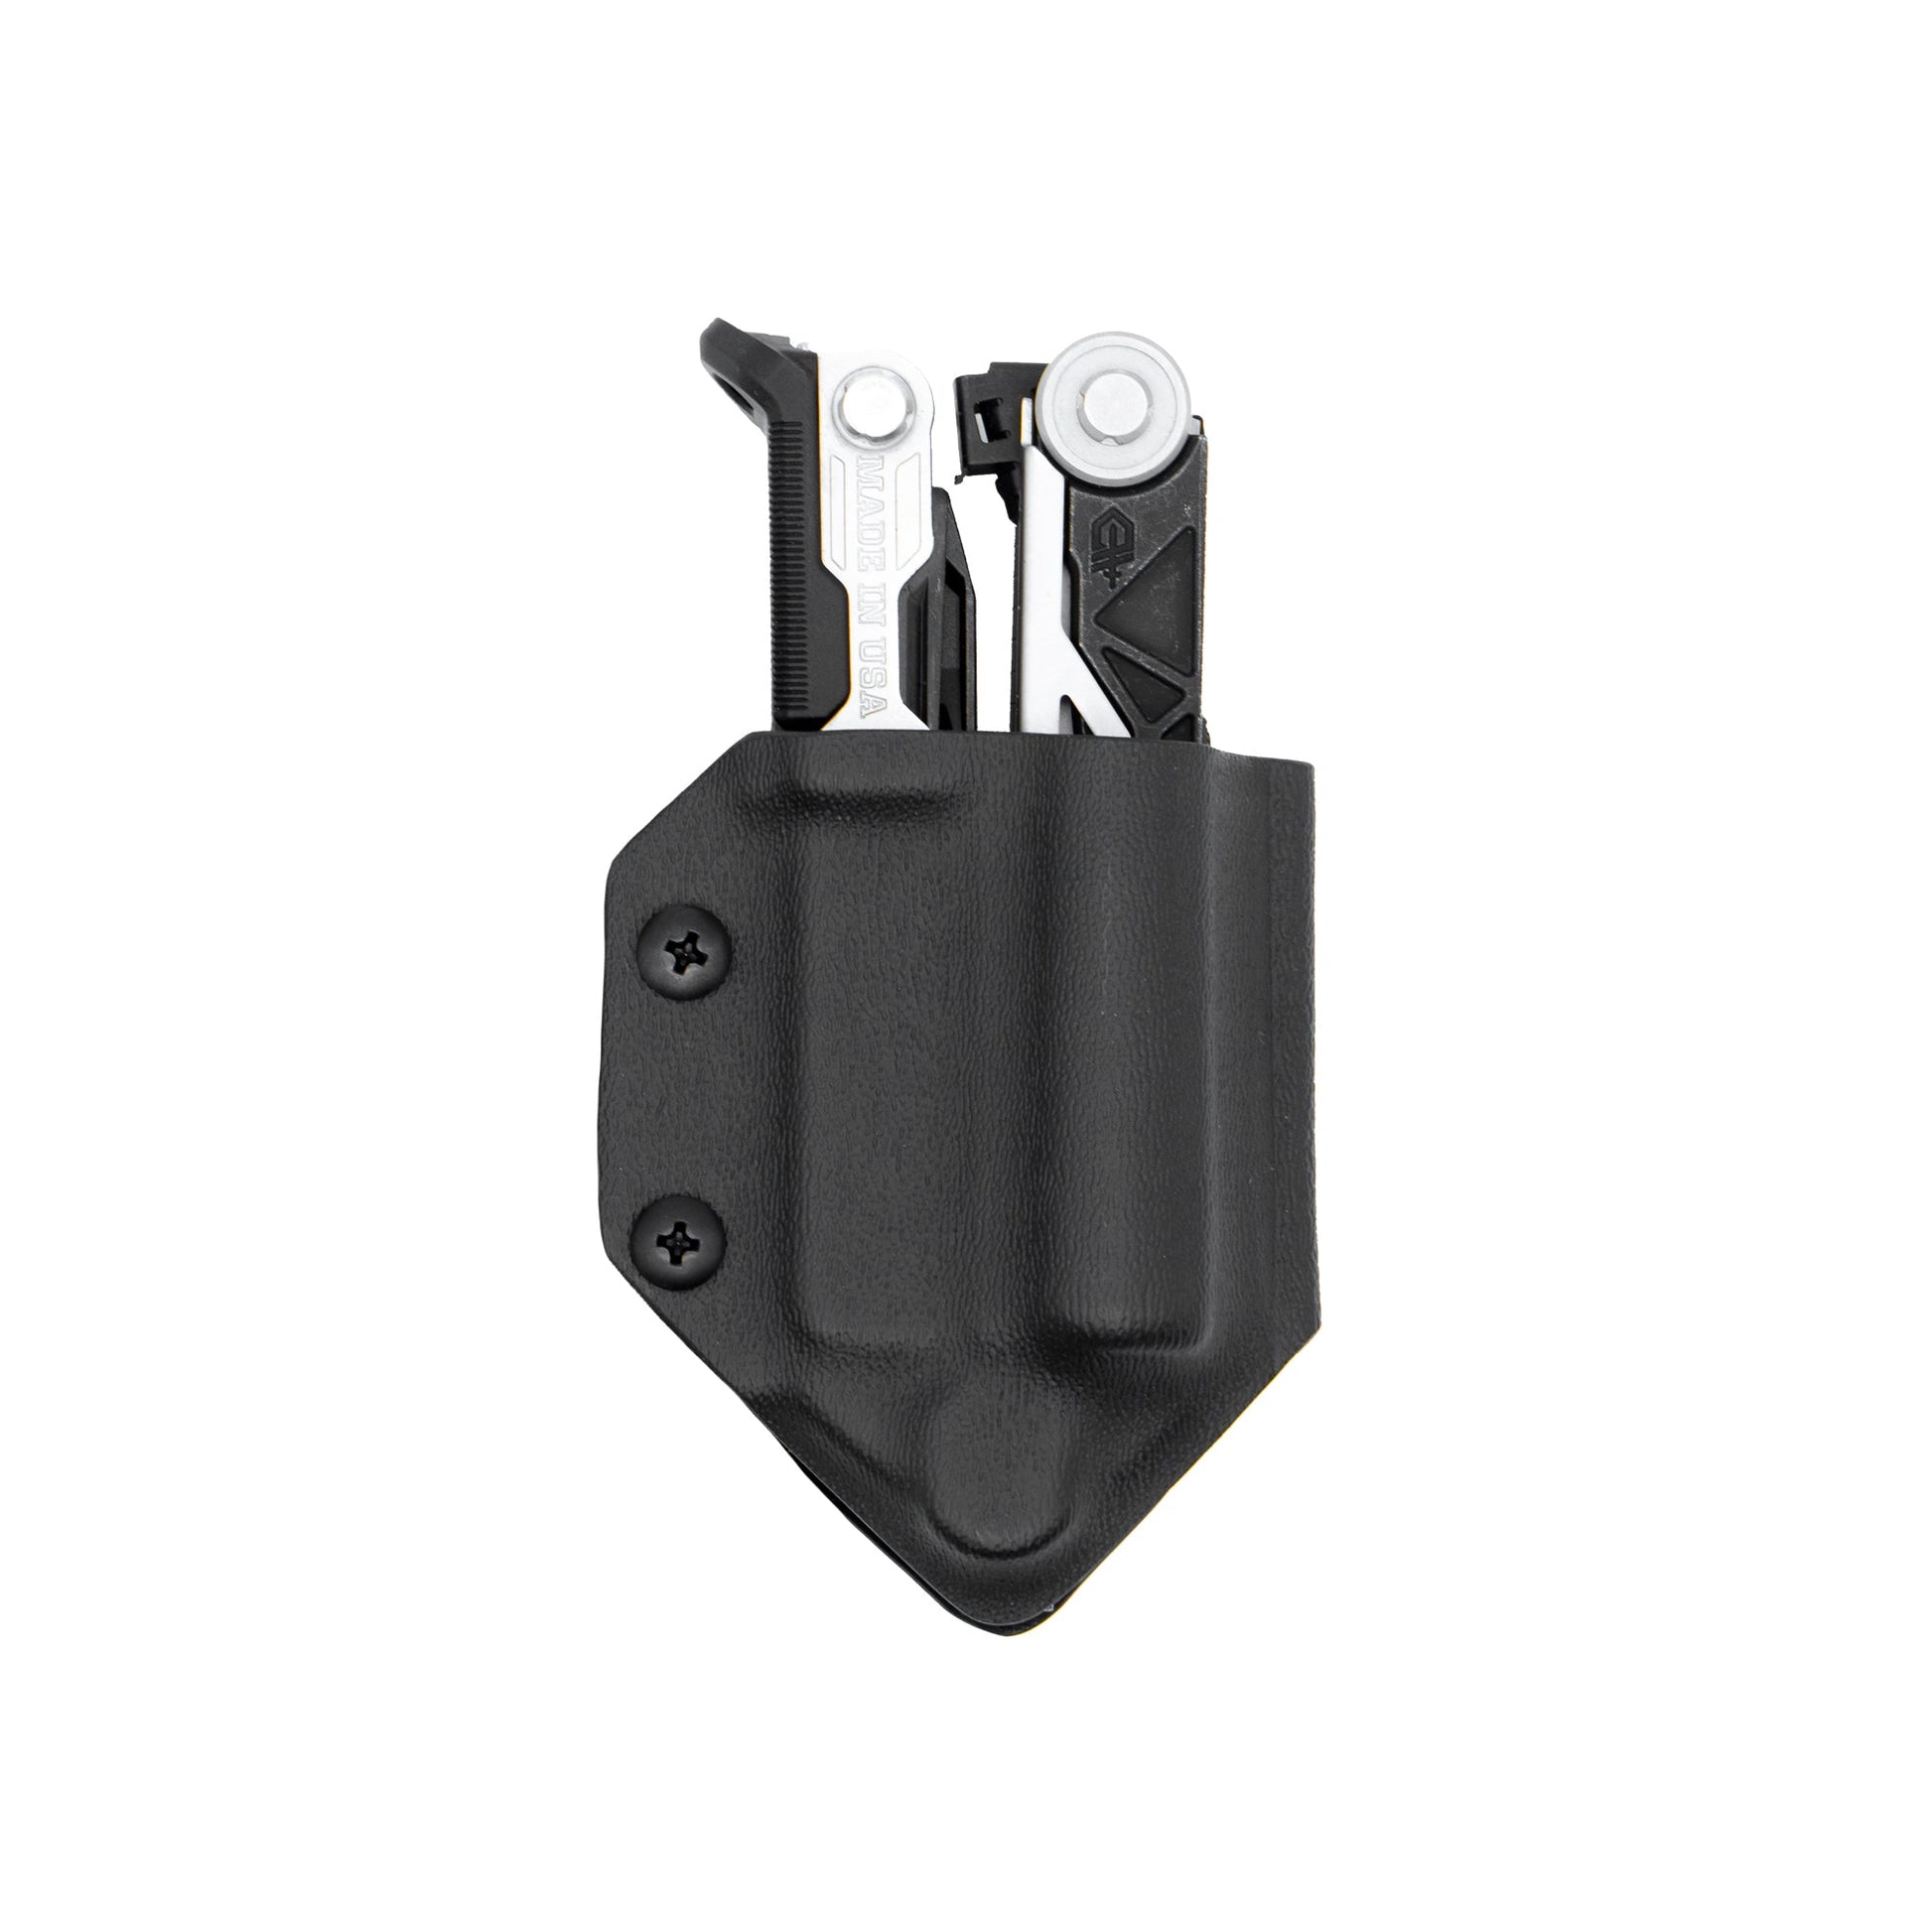 Kydex Sheath for the Gerber Center-Drive Clip & Carry